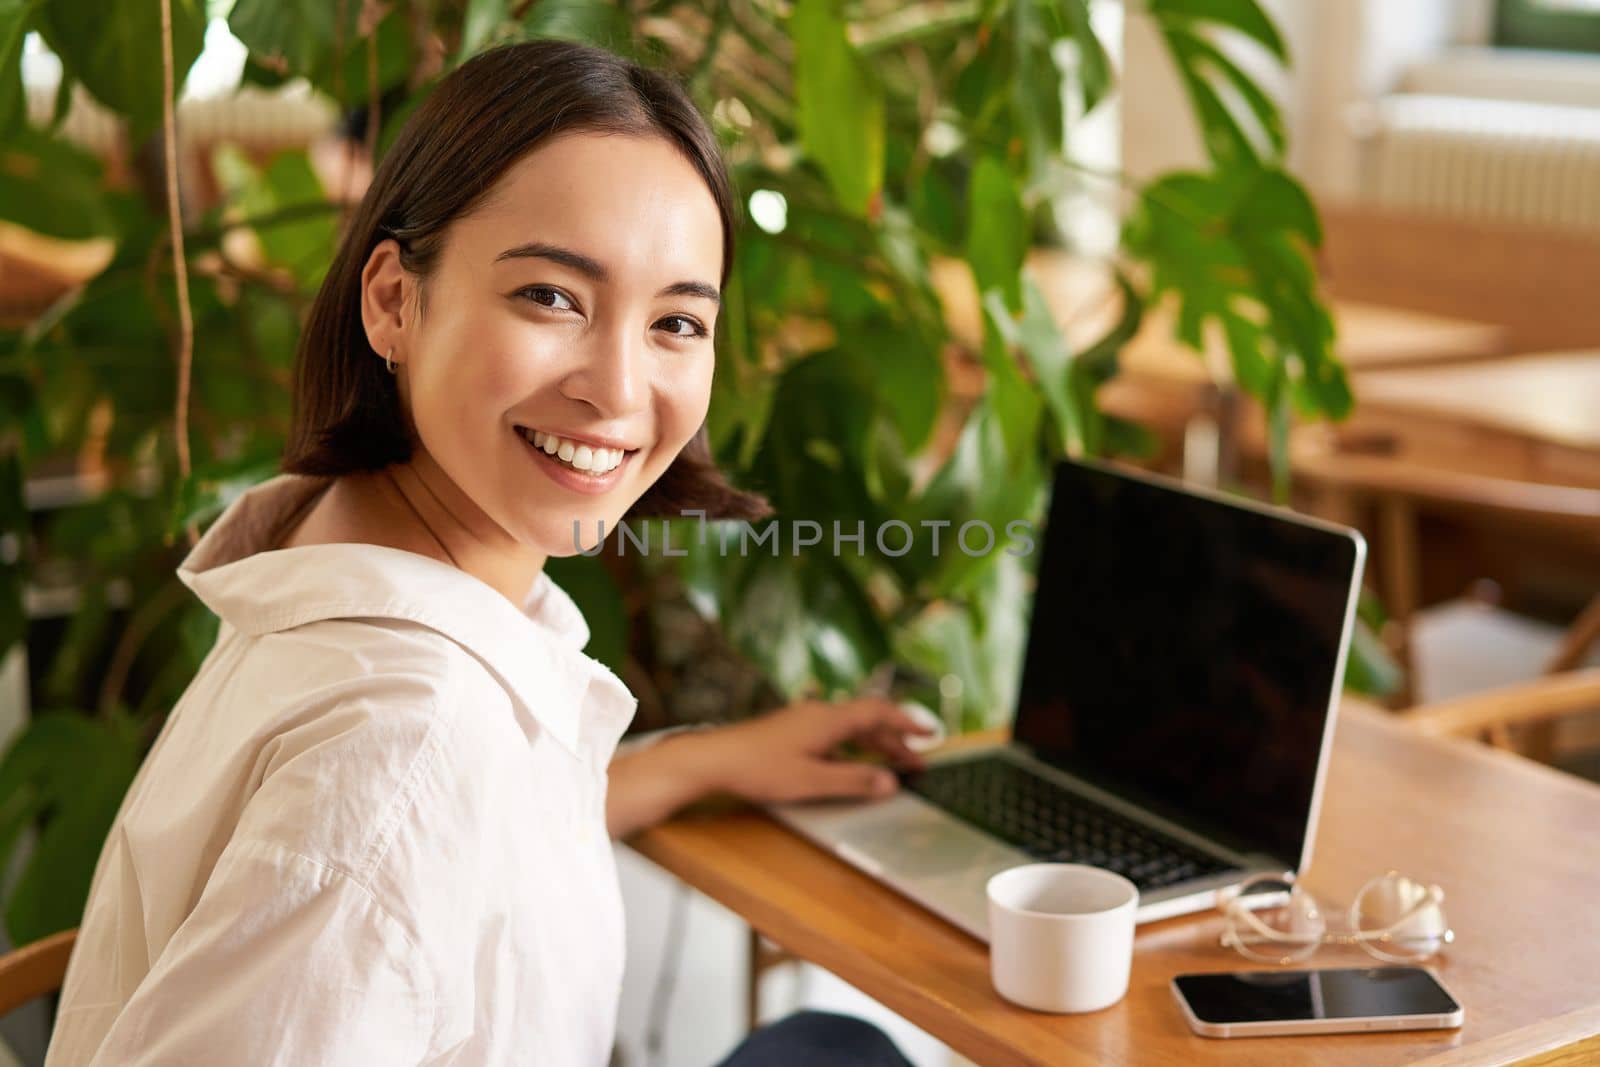 Young female entrepreneur, girl sits with laptop in cafe, works on remore from restaurant, drinks coffee and smiles.